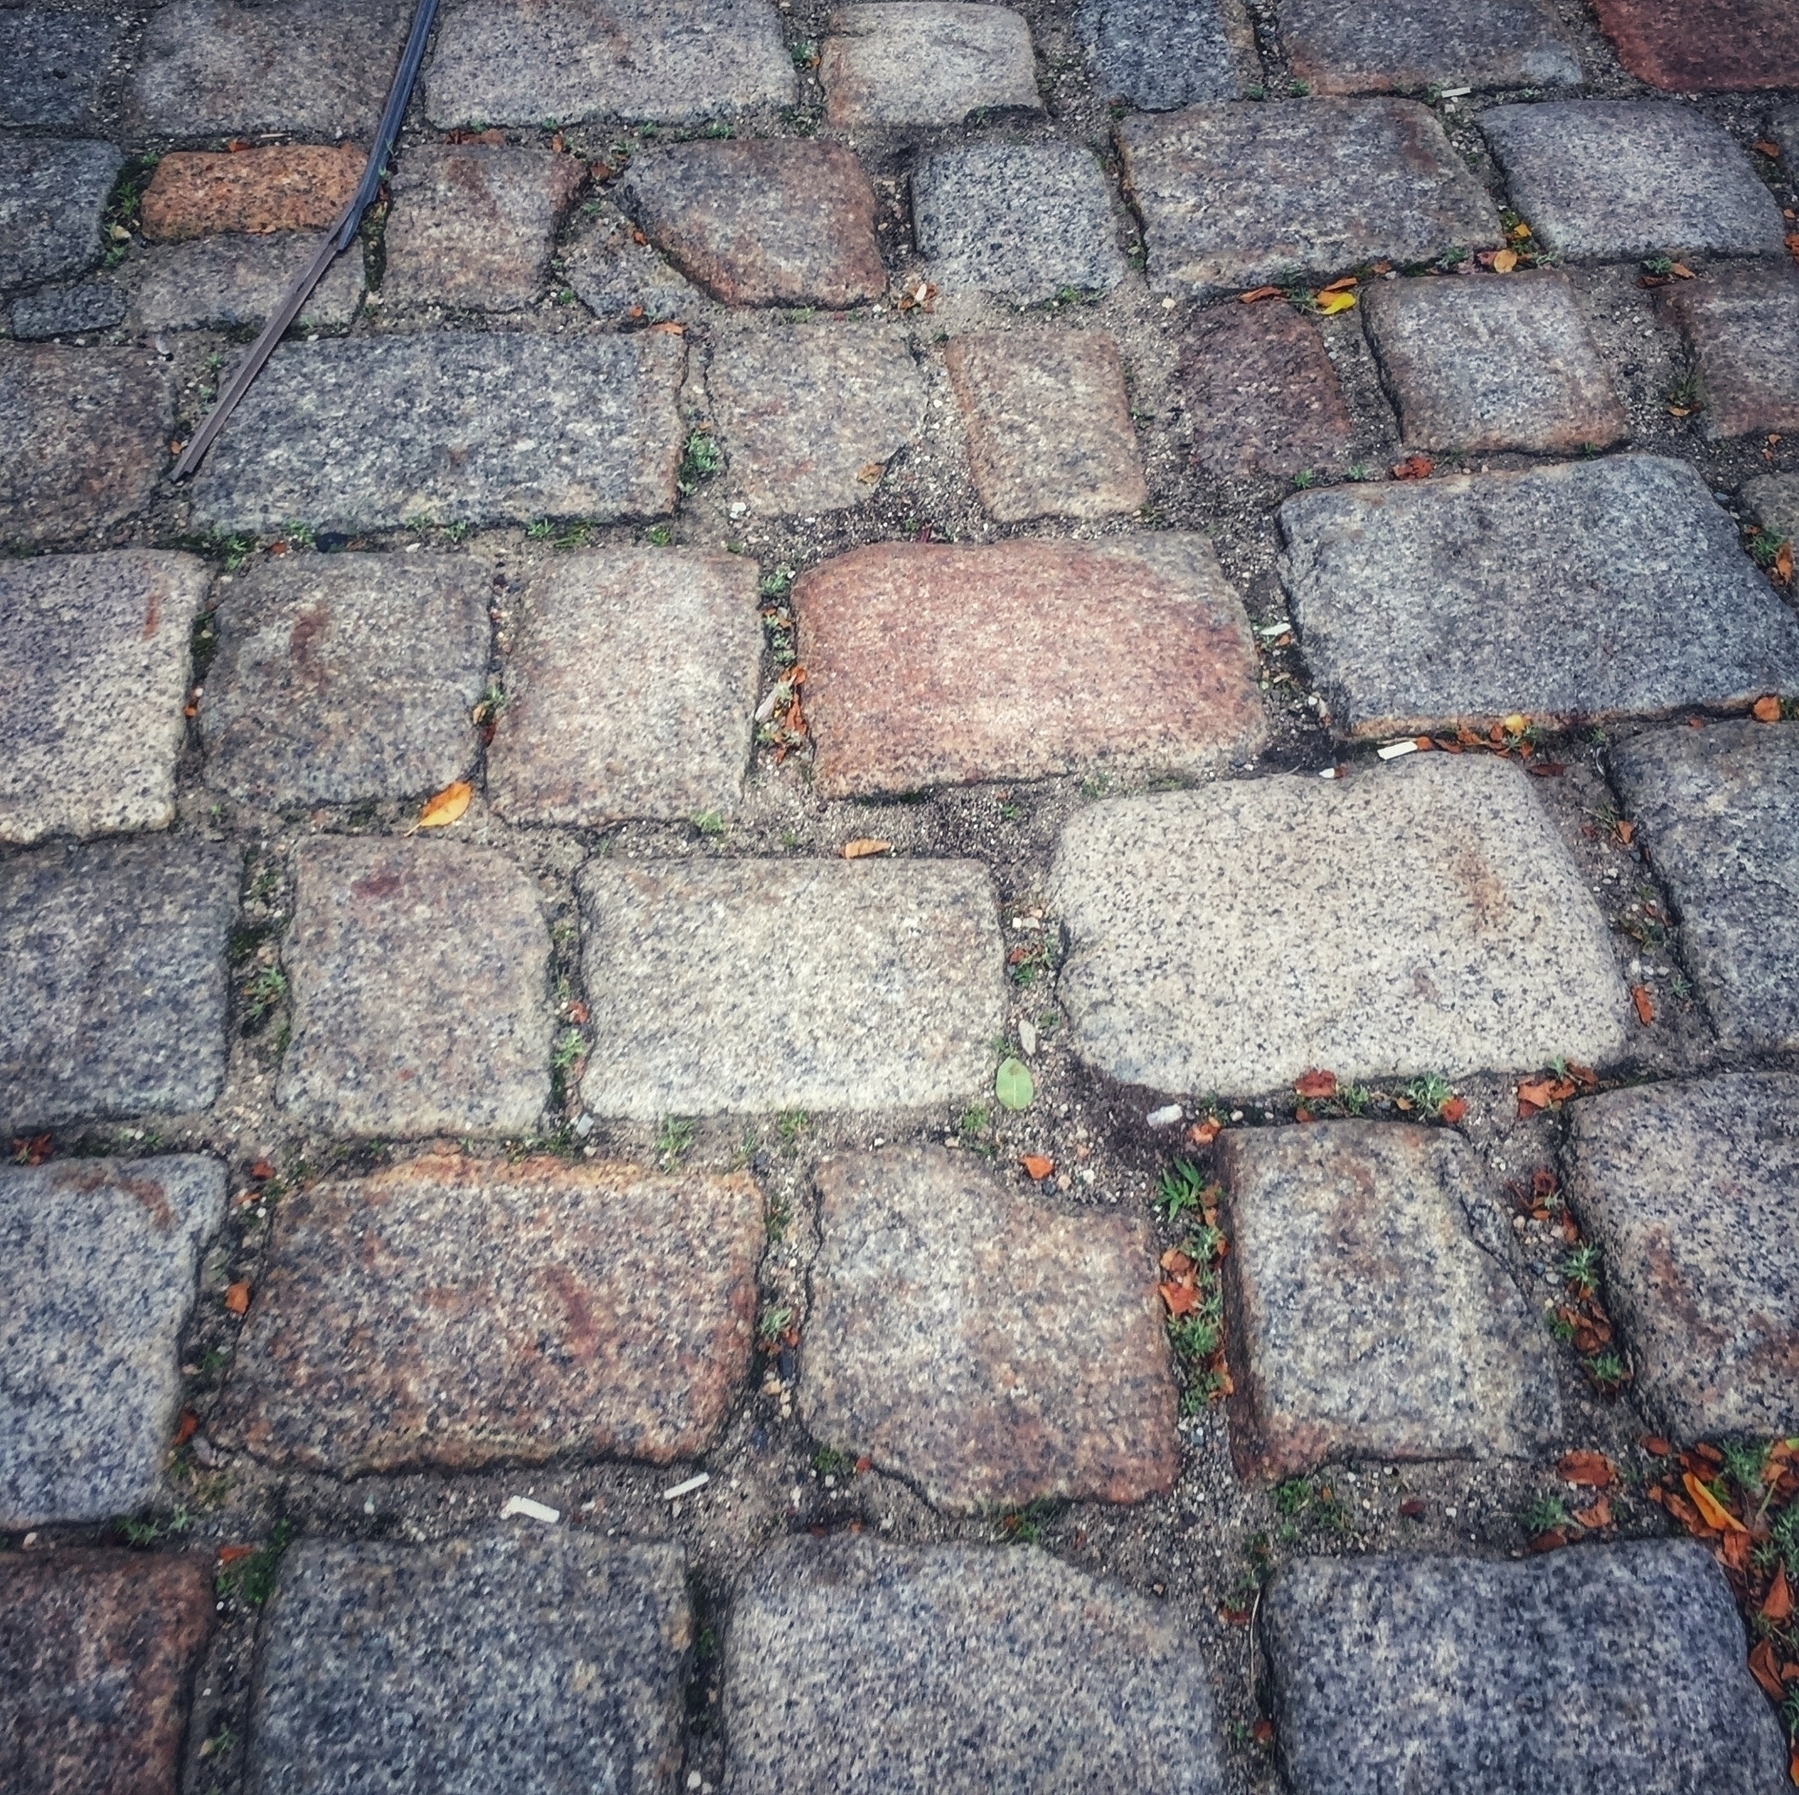 Cobblestone pavement with varied stone sizes and colors, with small weeds and leaves, indicating an outdoor setting.